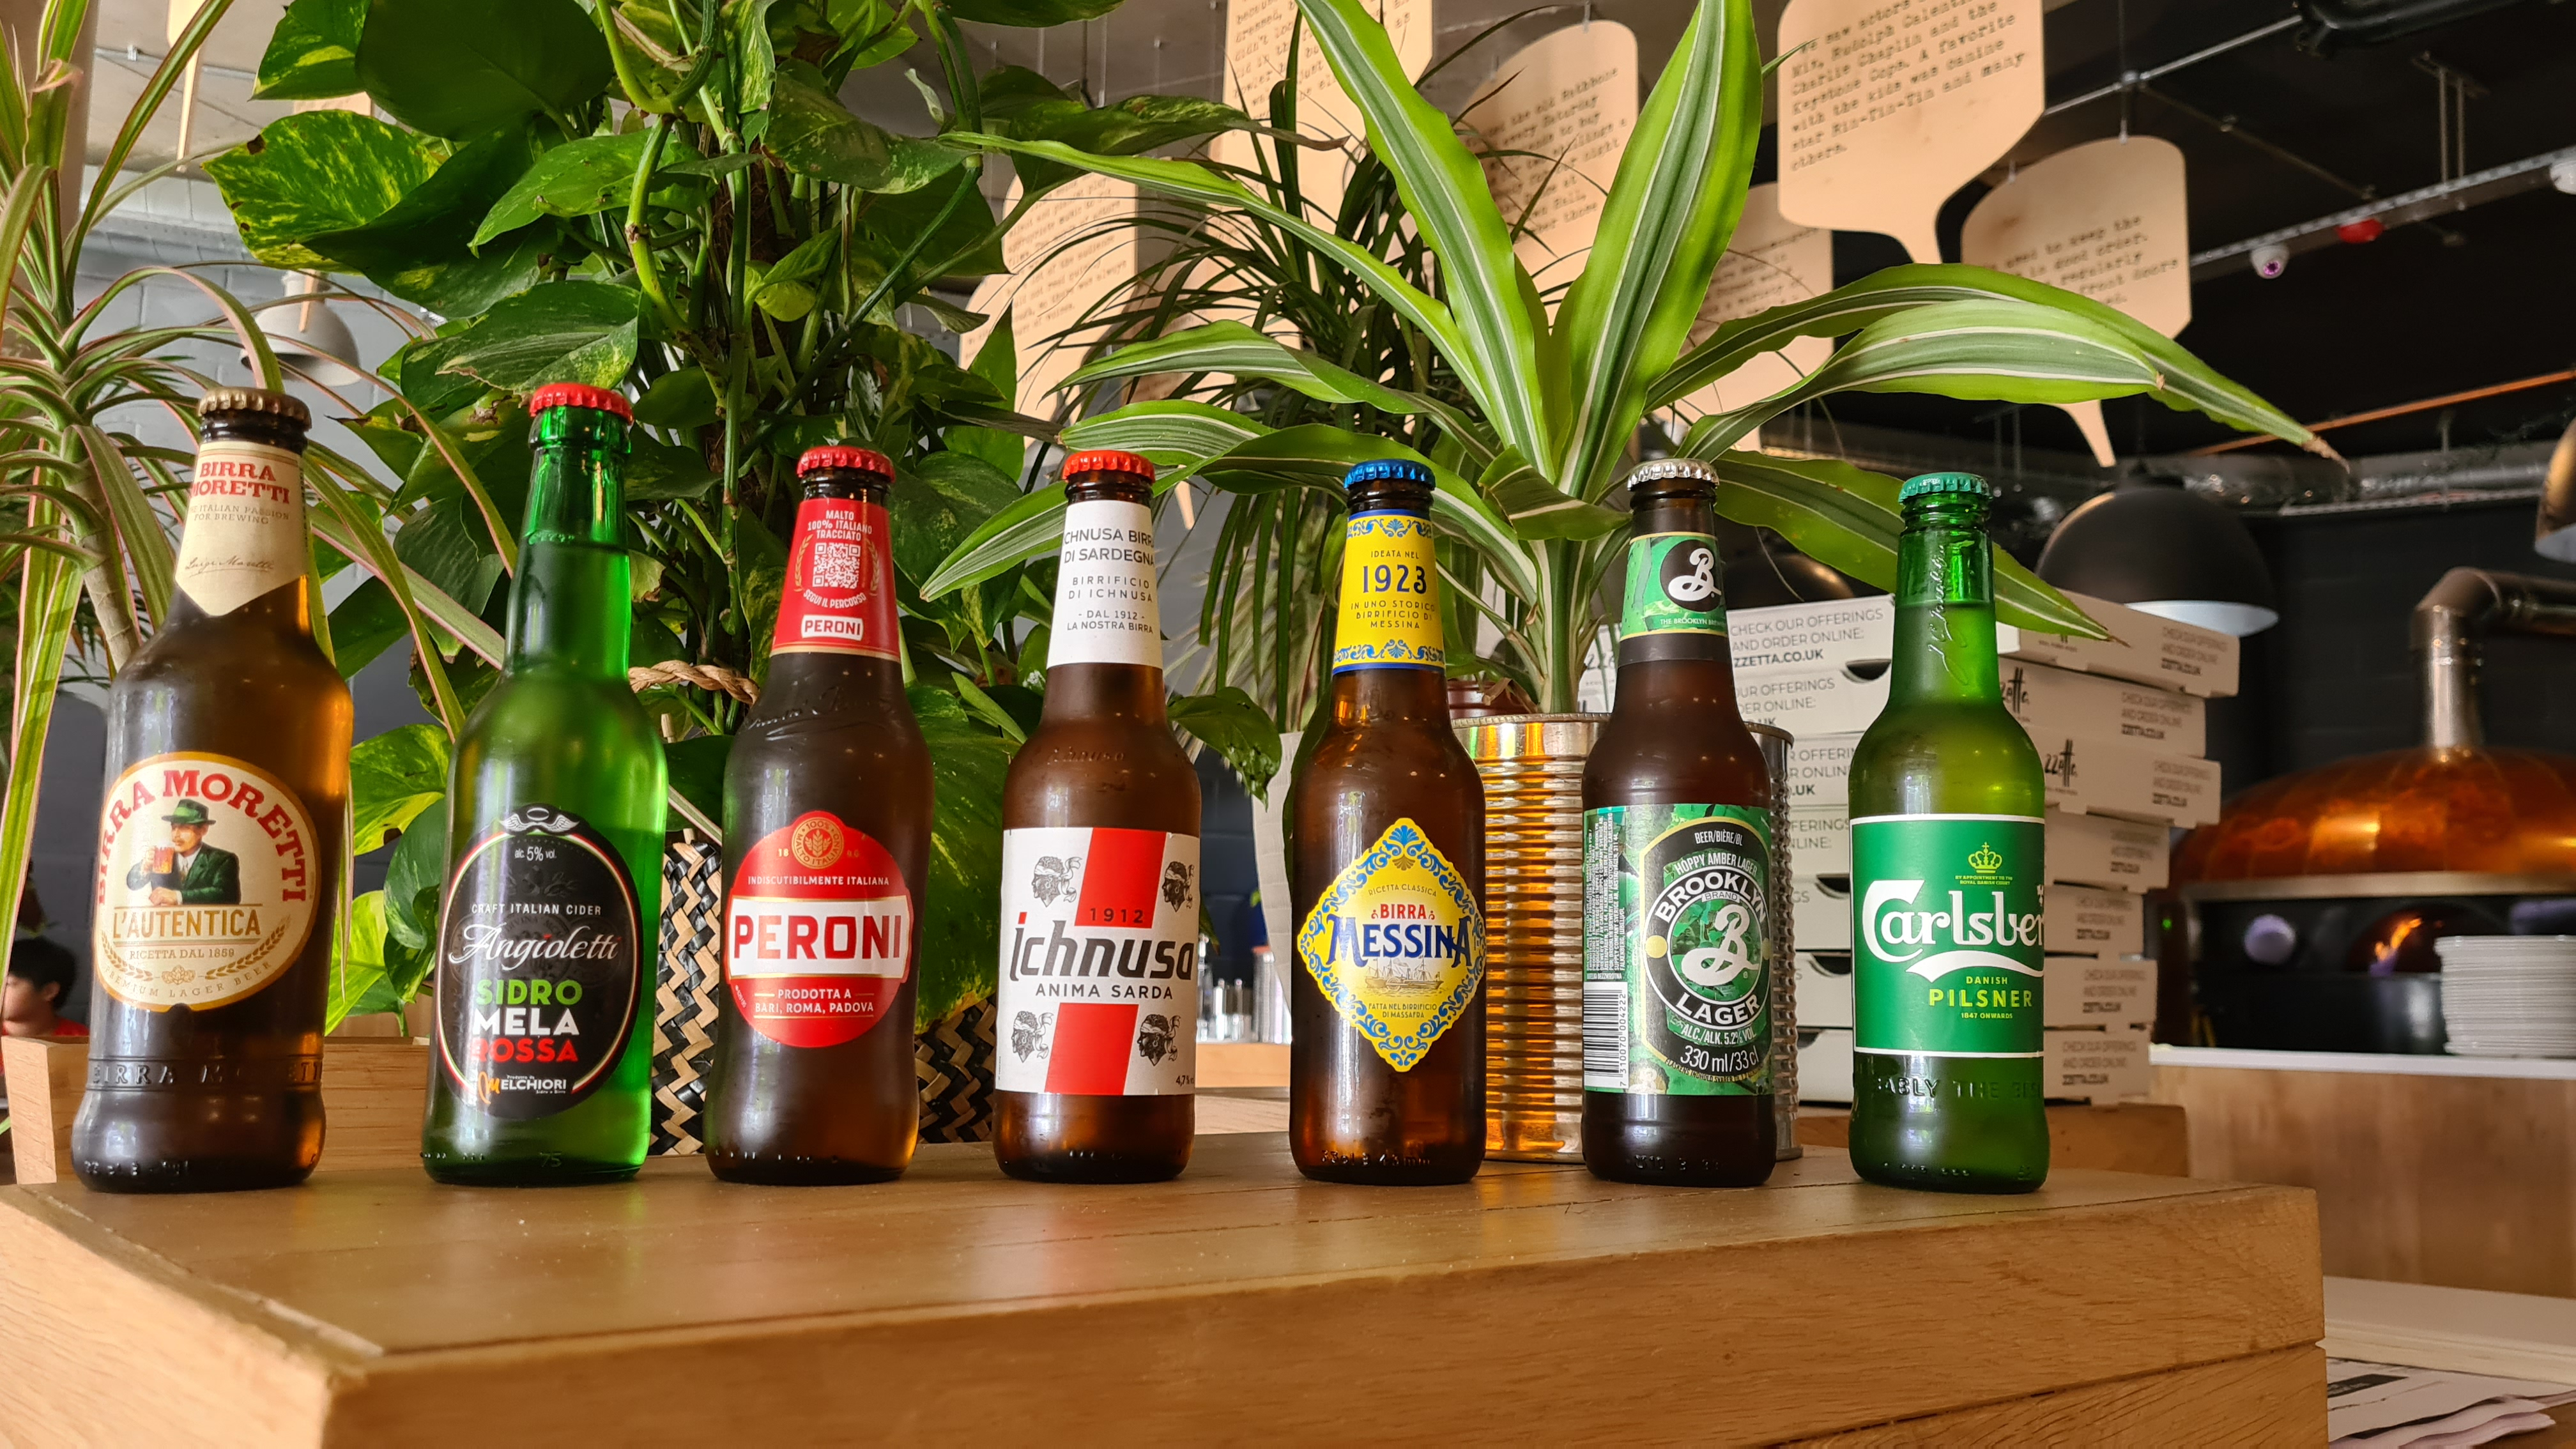 Beers served at Zzetta (Including: Morretti, Angioletti, Peroni, Ichnusa, Messina, Brooklyn Larger, and Carlsberg Pilsner)